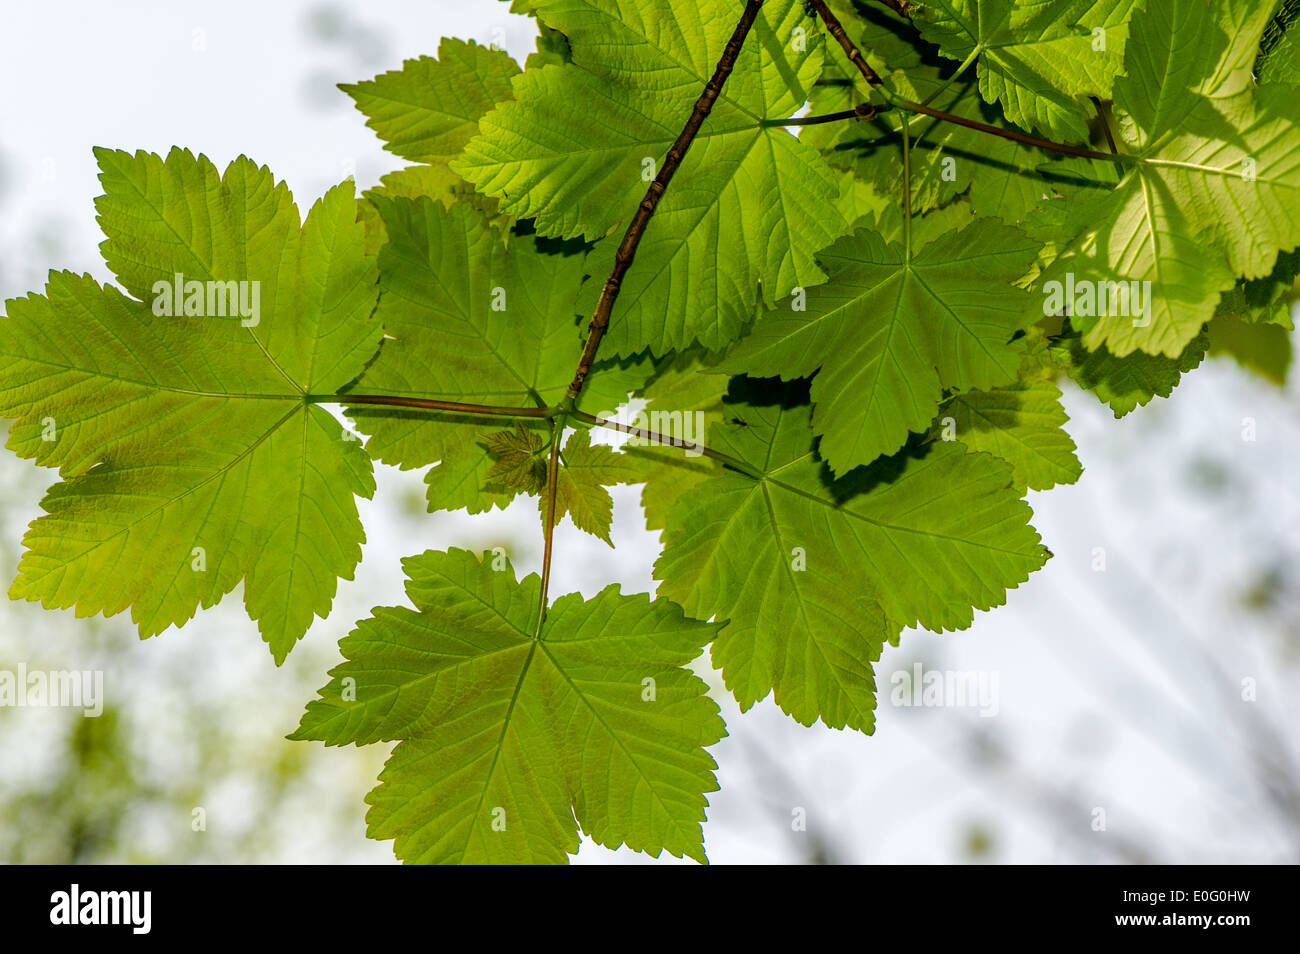 Norway maple or sycamore leaves. Stock Photo